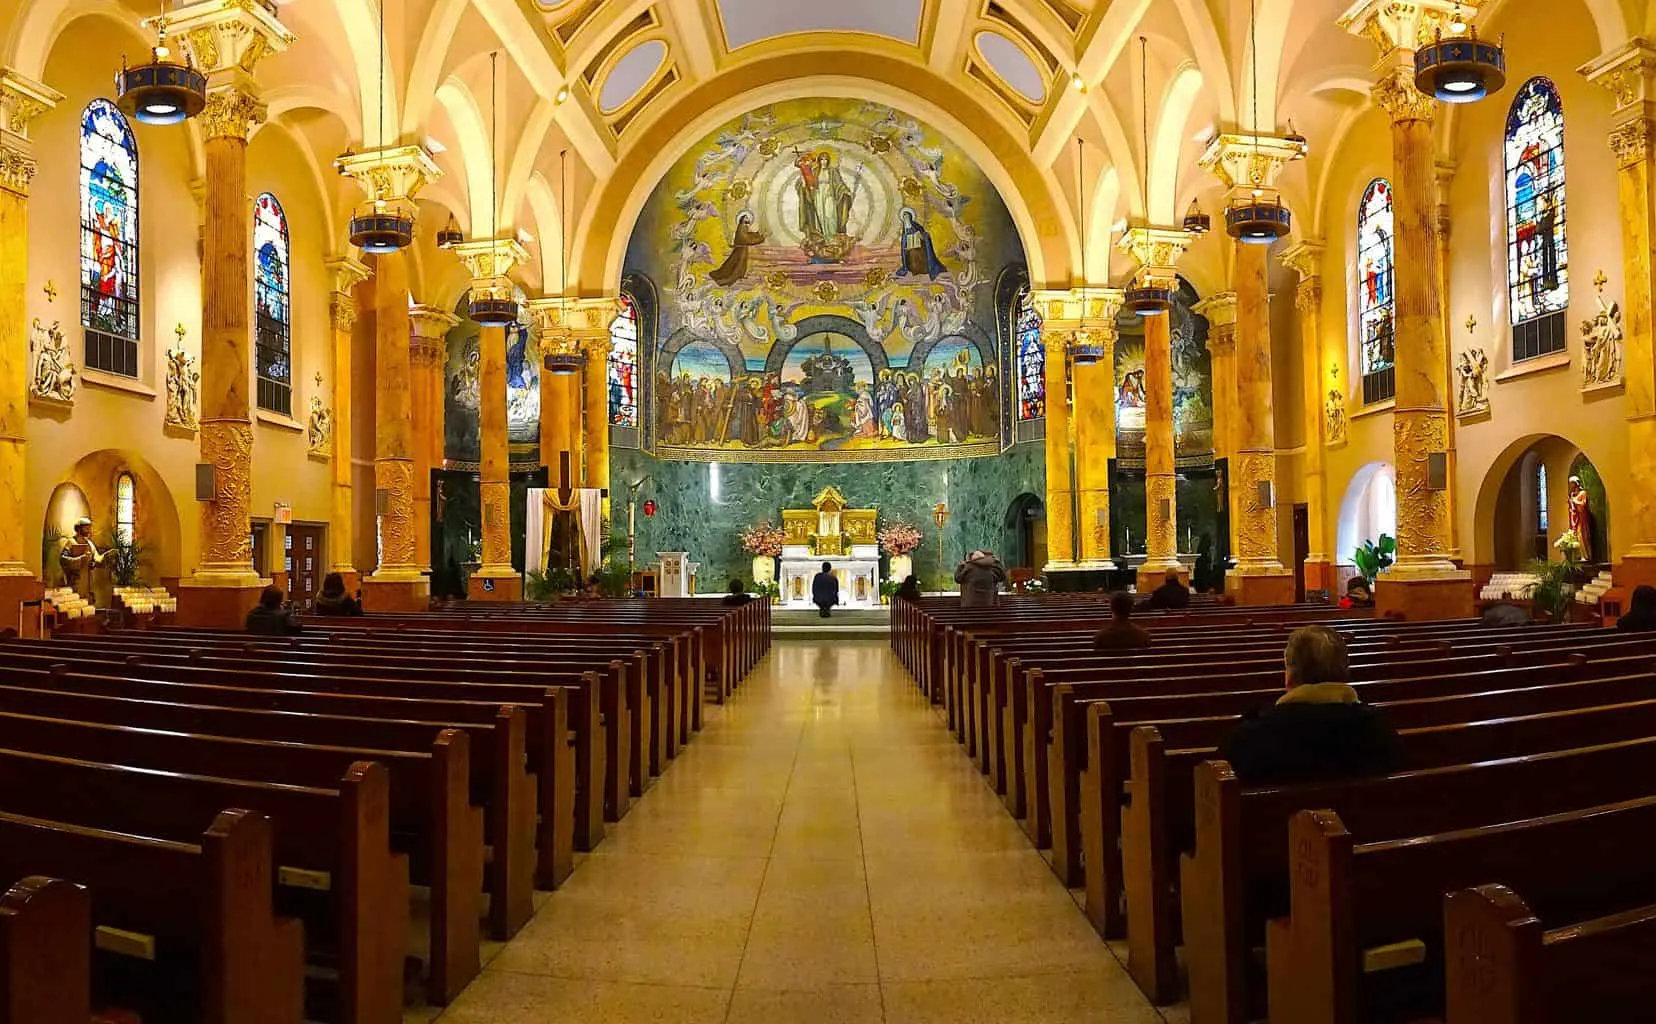 The opulent interior of the Church of St. Francis Assisi in Manhattan, NYC. Image sourced from Anthony Jalandoni on Flickr.com.